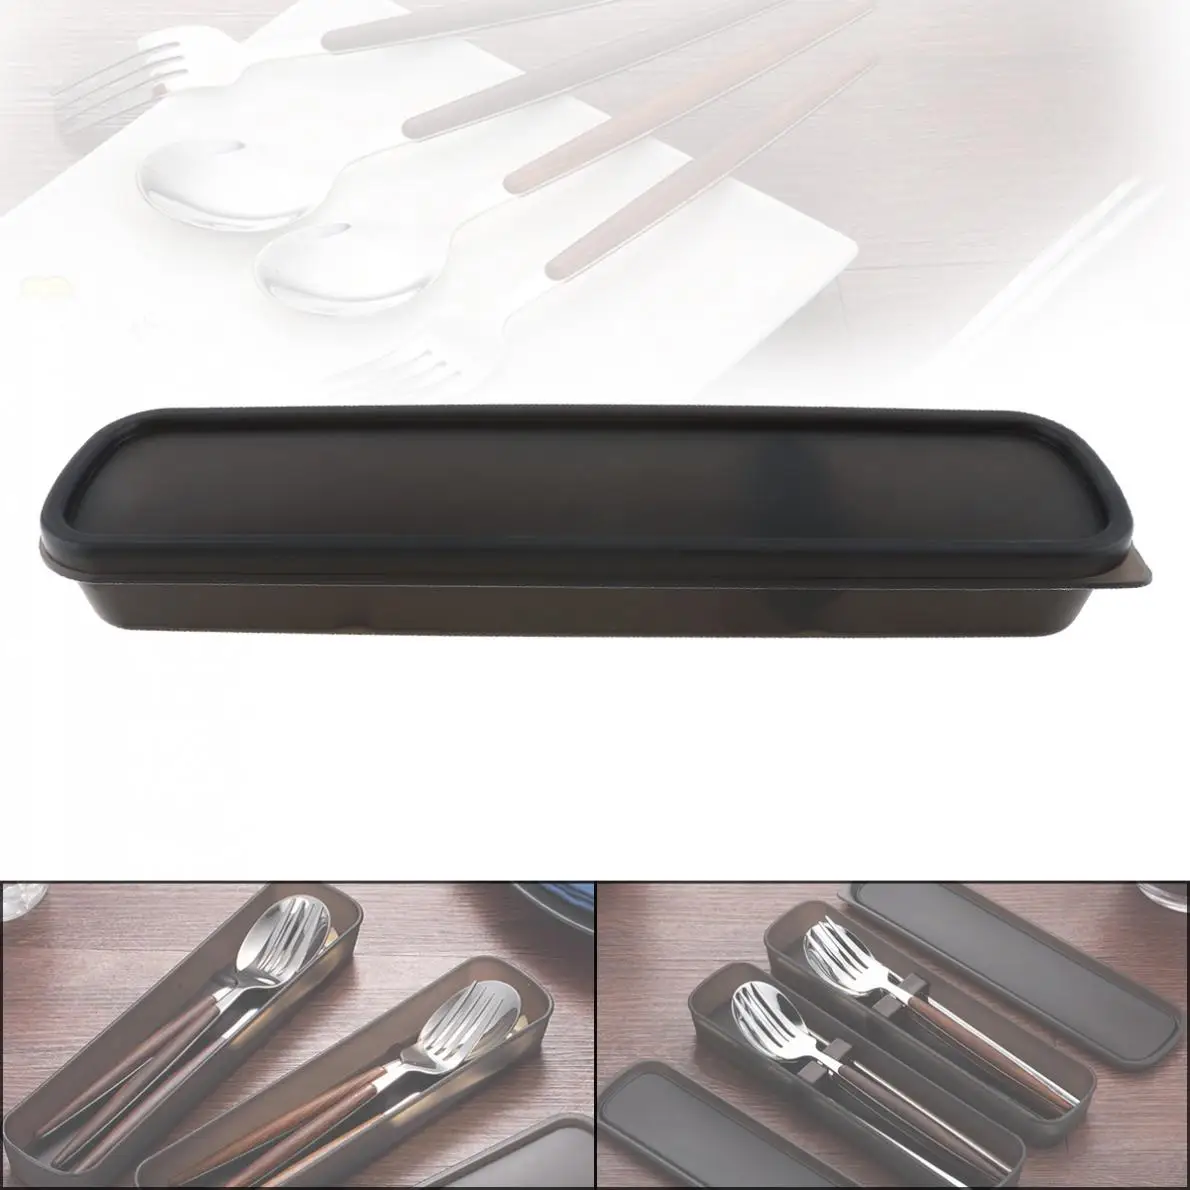 

Universal Black Portable PP Cutlery Receptacle Tableware Storage Box with Silicone Pad